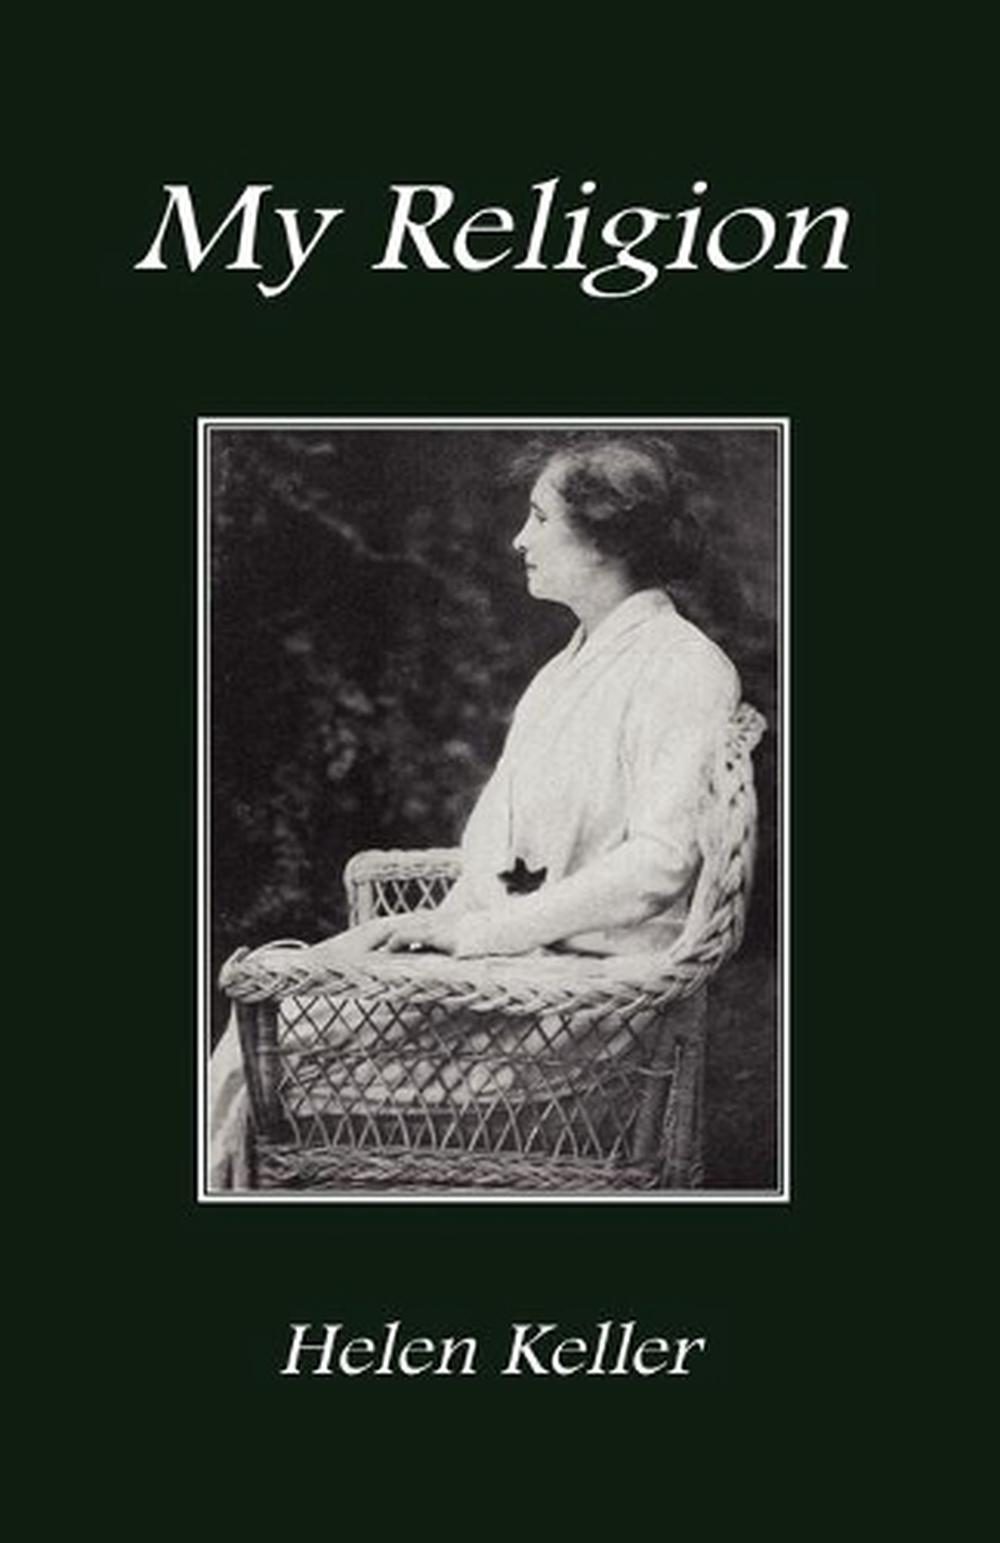 My Religion by Helen Keller (English) Paperback Book Free Shipping